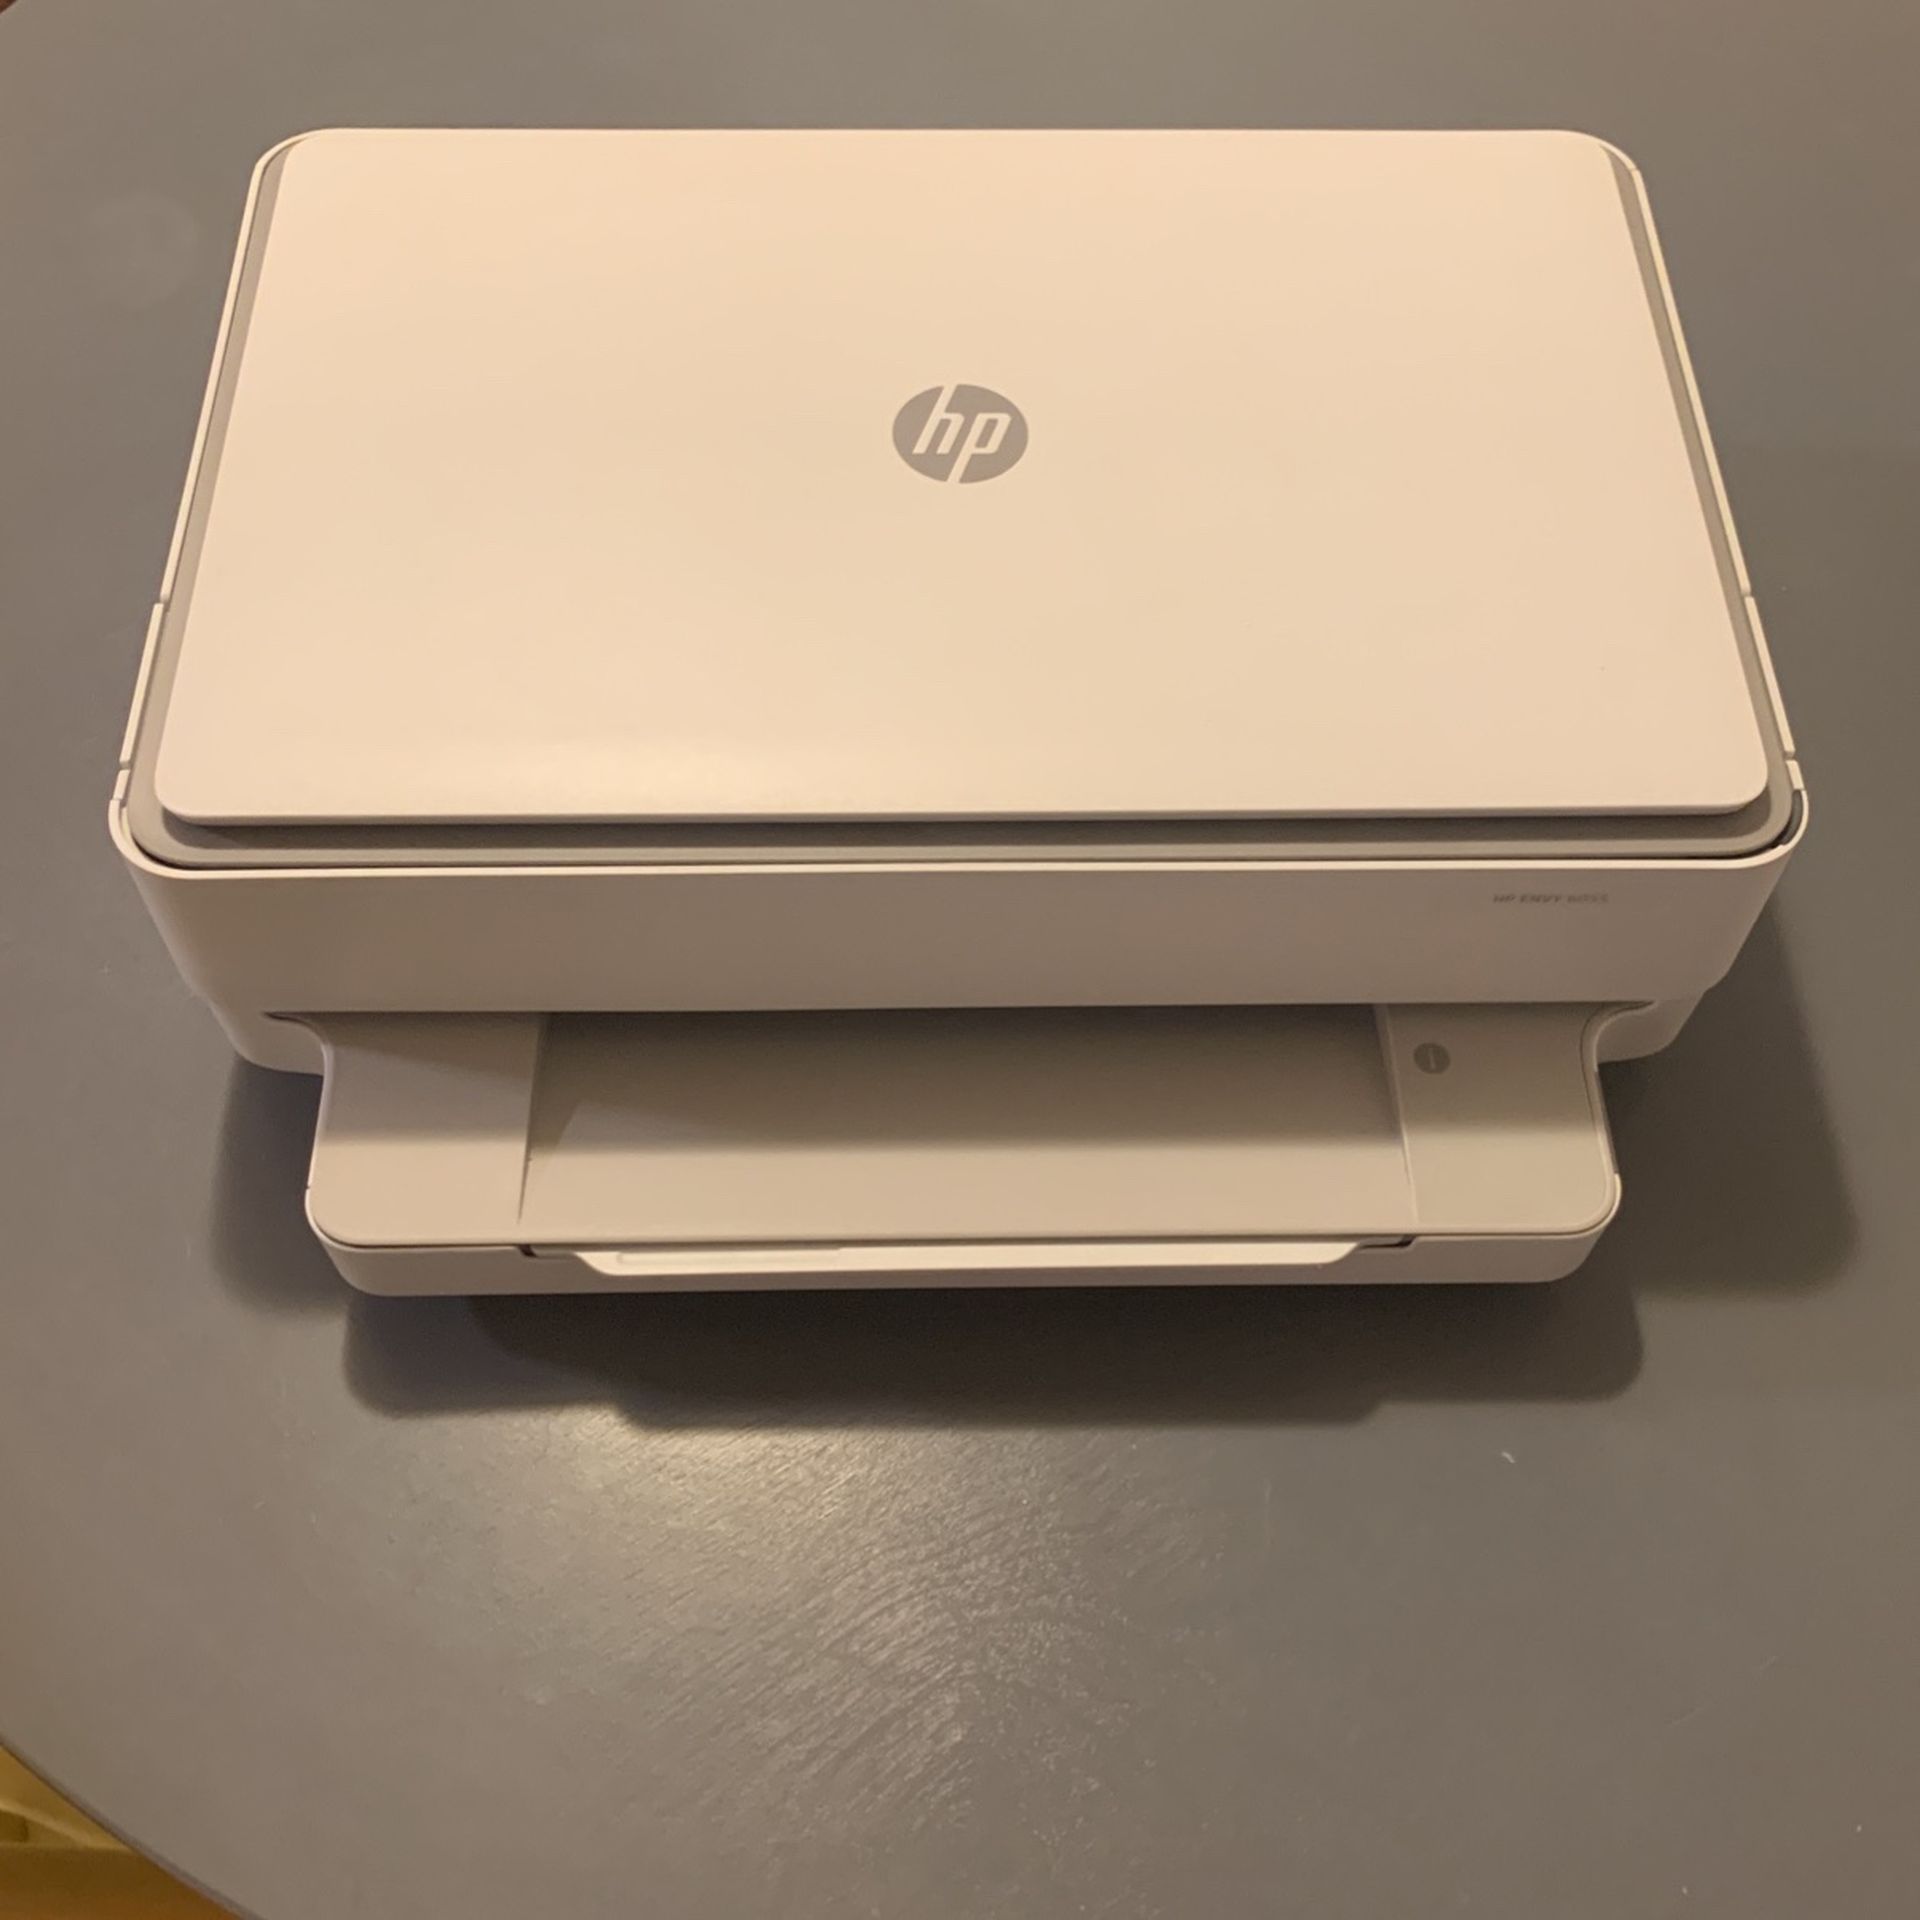 HP Envy 6055 Wireless Ink All In One Printer